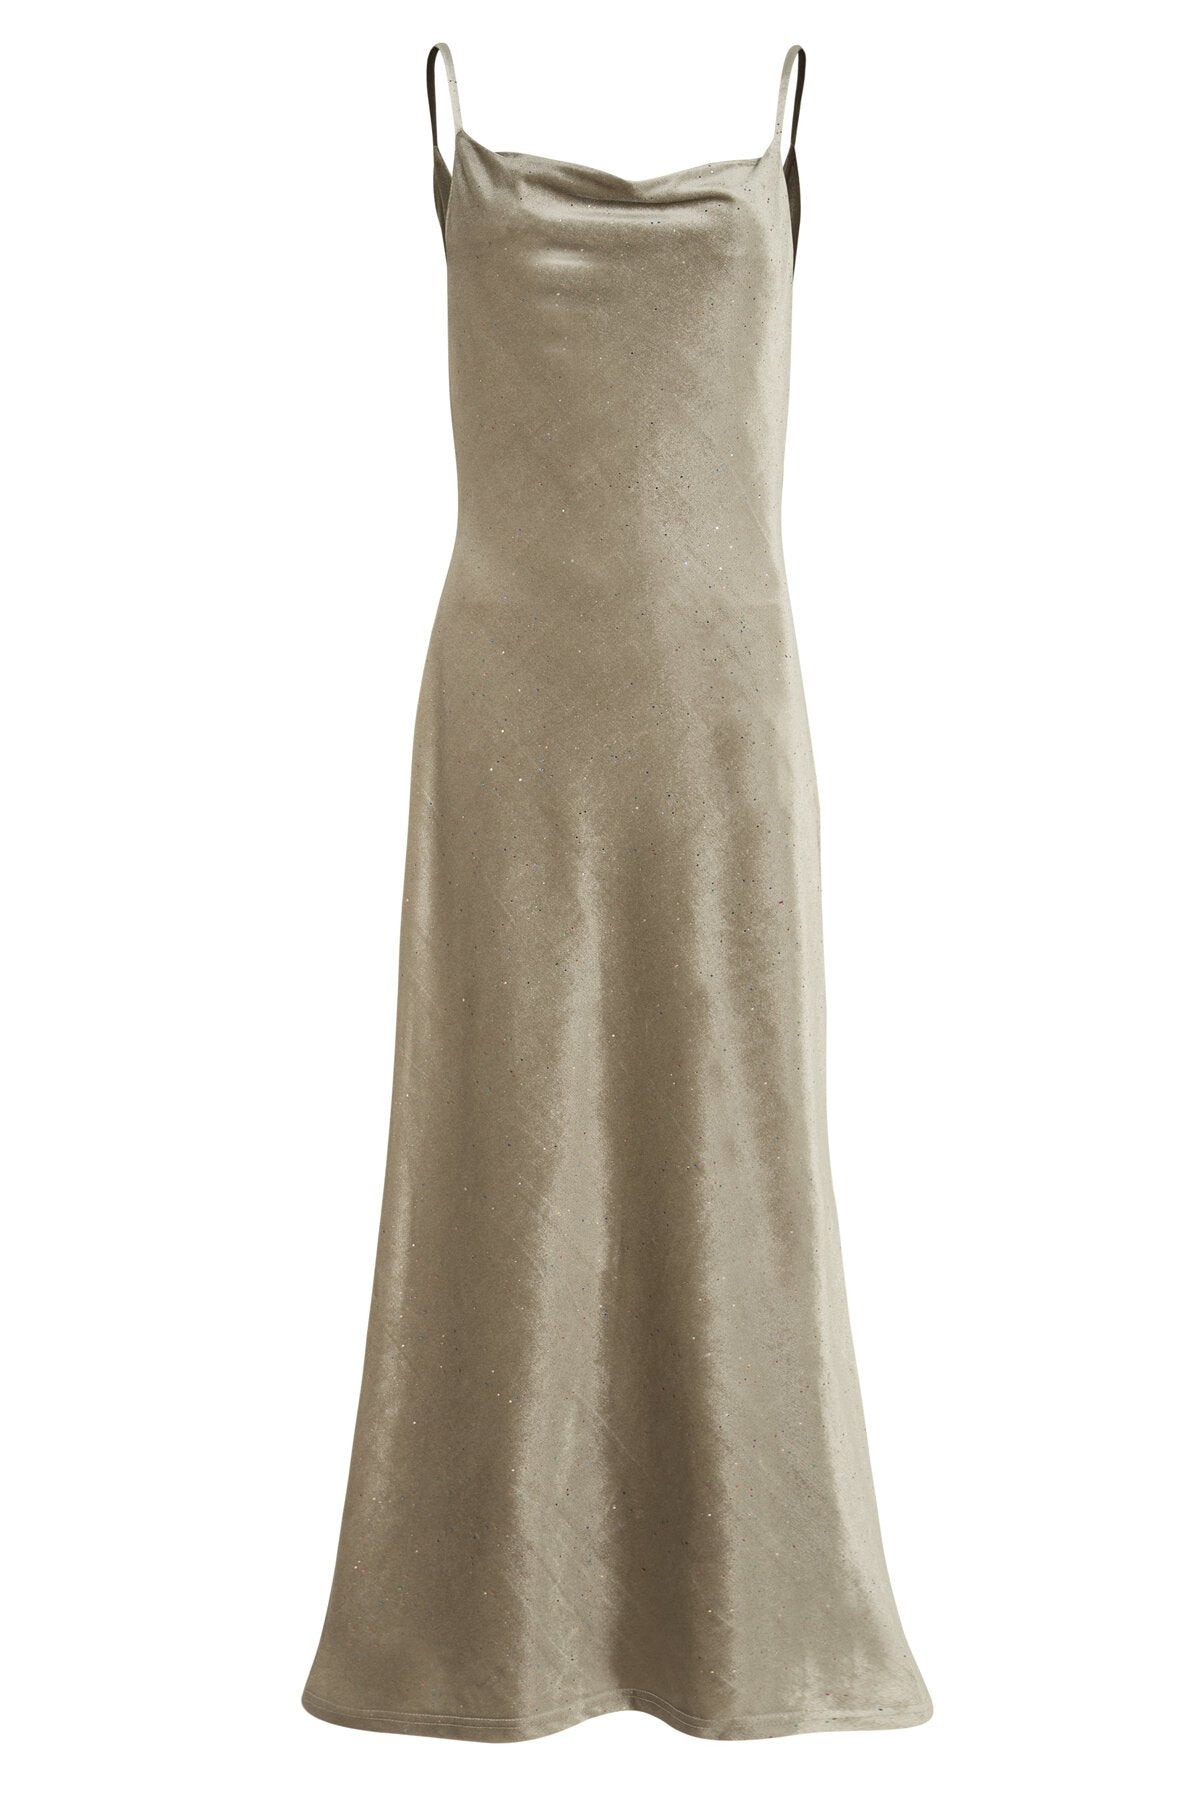 Coop - Do The Night Thing Dress - Silver